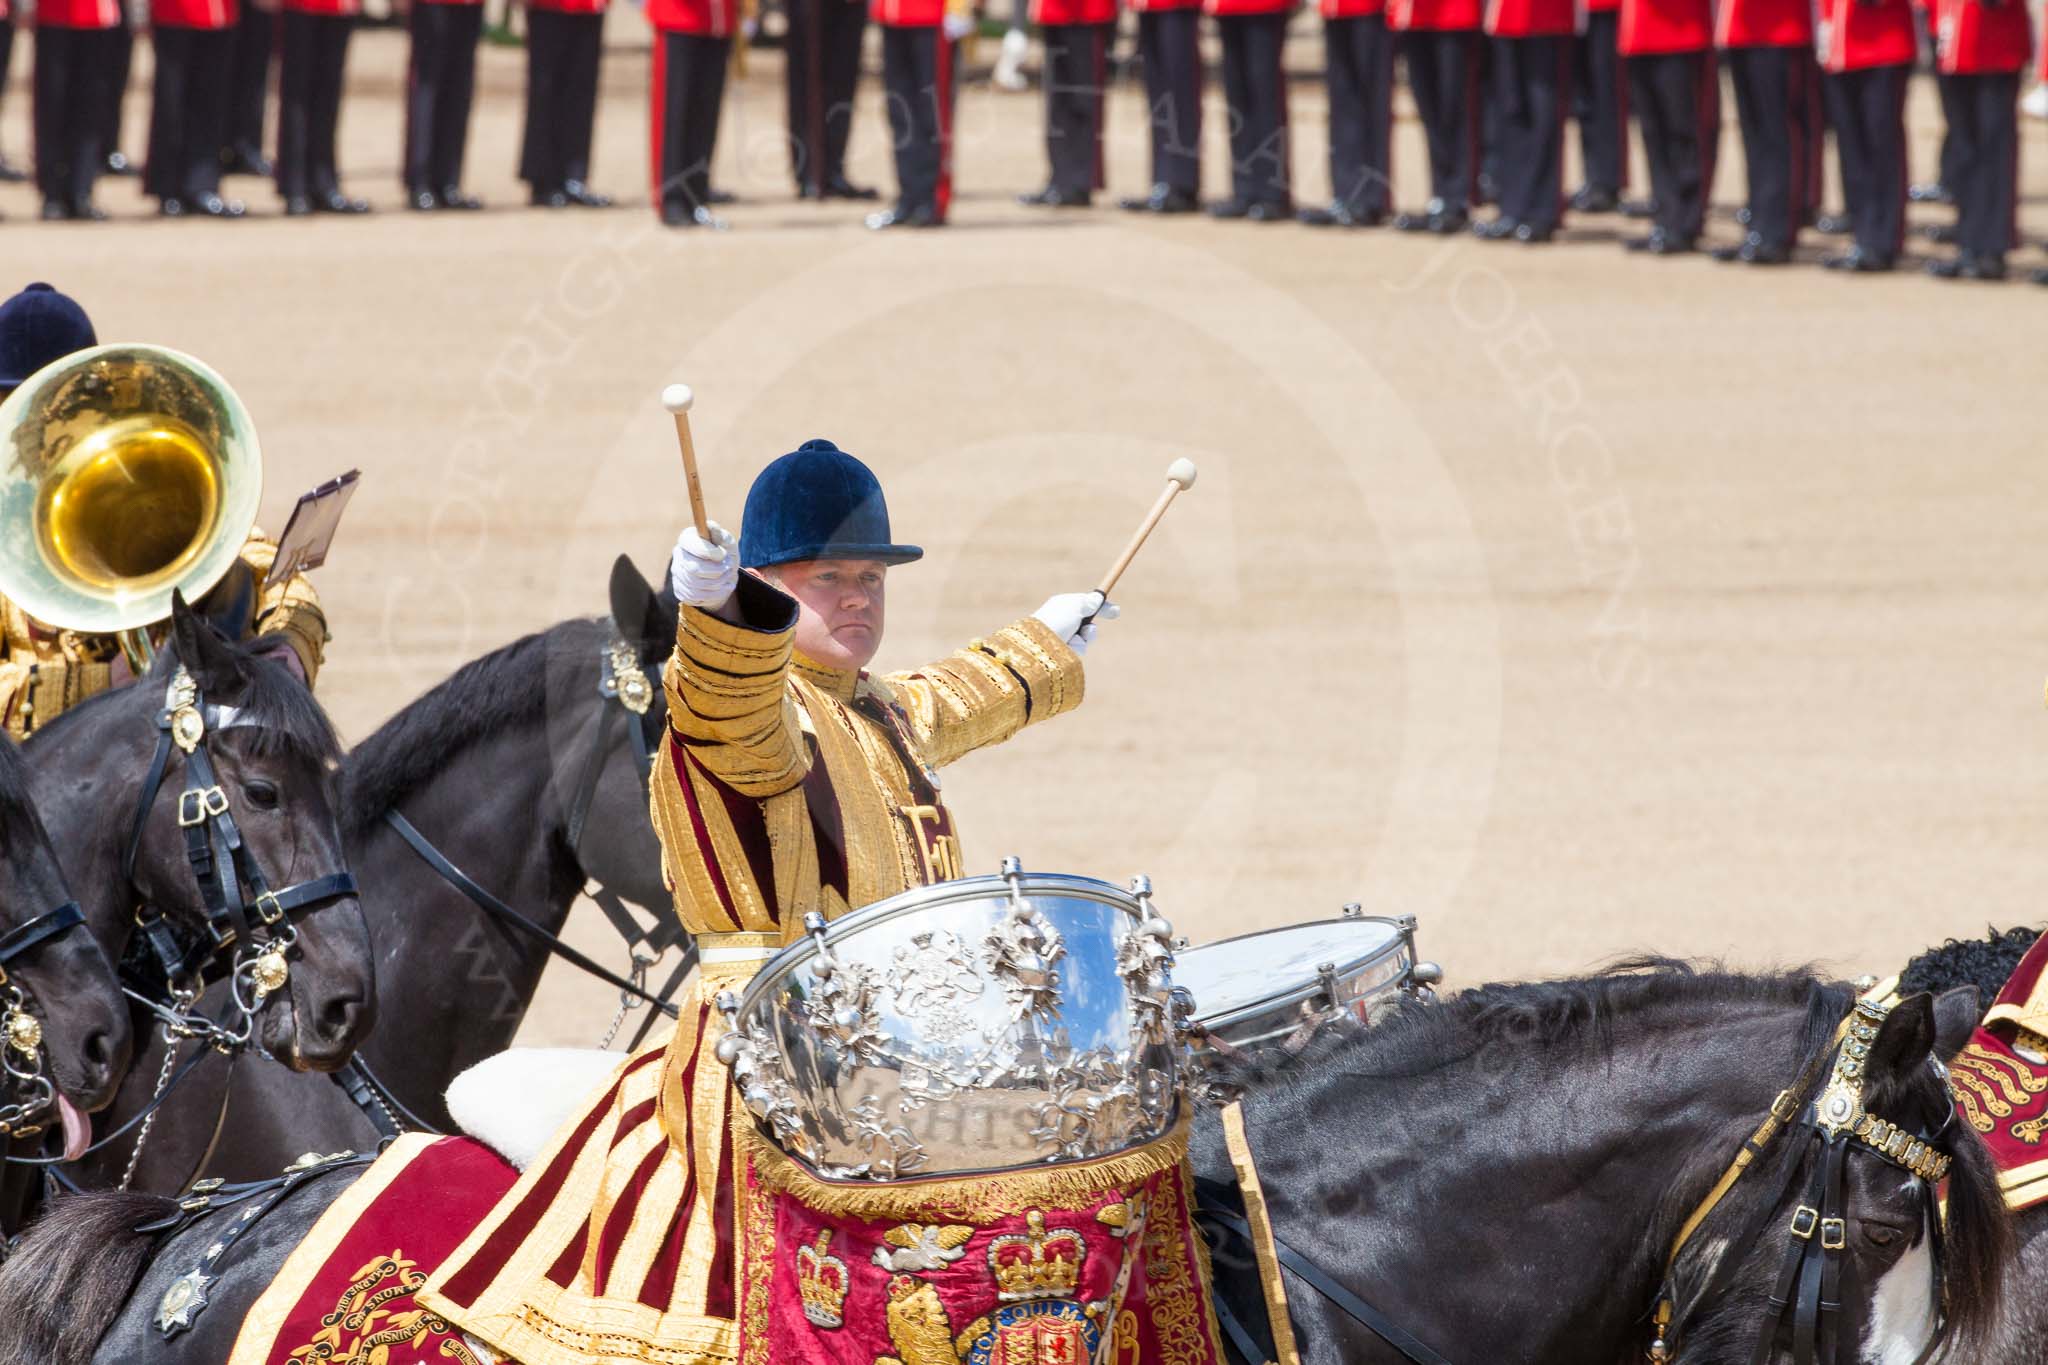 The Colonel's Review 2013: The two kettle drummers, saluting Her Majesty, as the Mounted Bands are about to march off..
Horse Guards Parade, Westminster,
London SW1,

United Kingdom,
on 08 June 2013 at 11:58, image #785